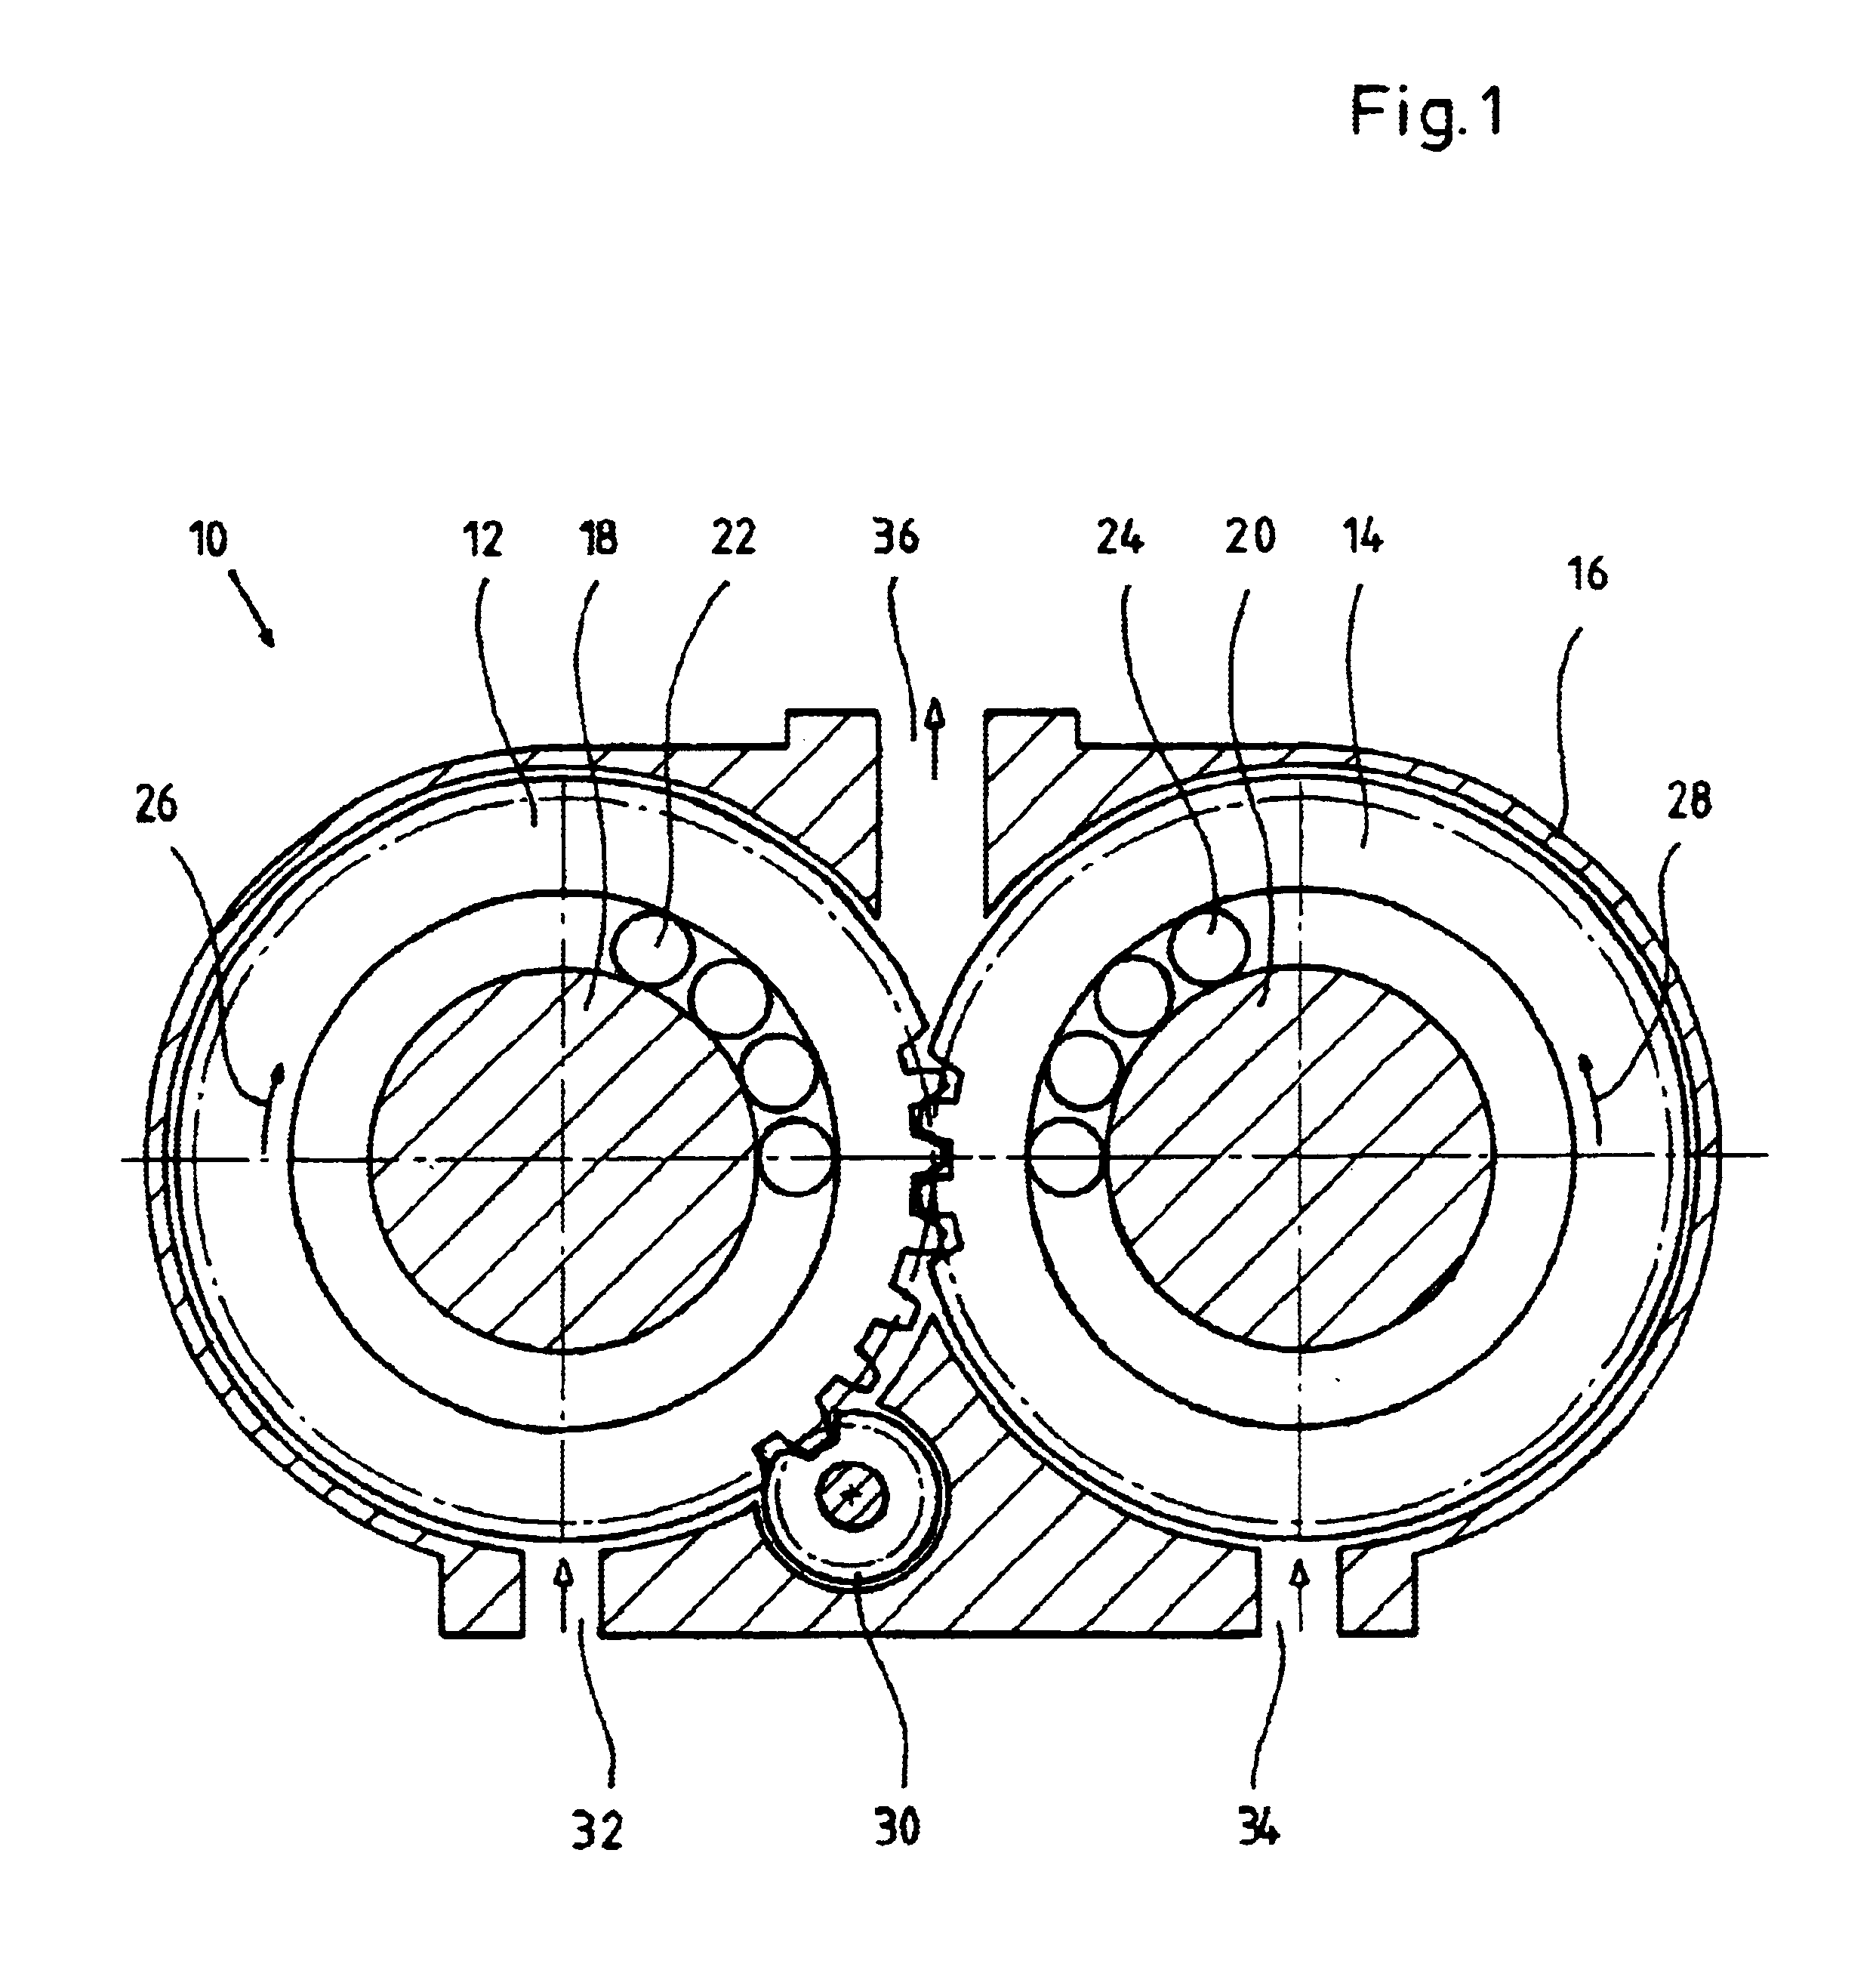 Rotary displacement machine having at least two annular displacement gears and supply channels